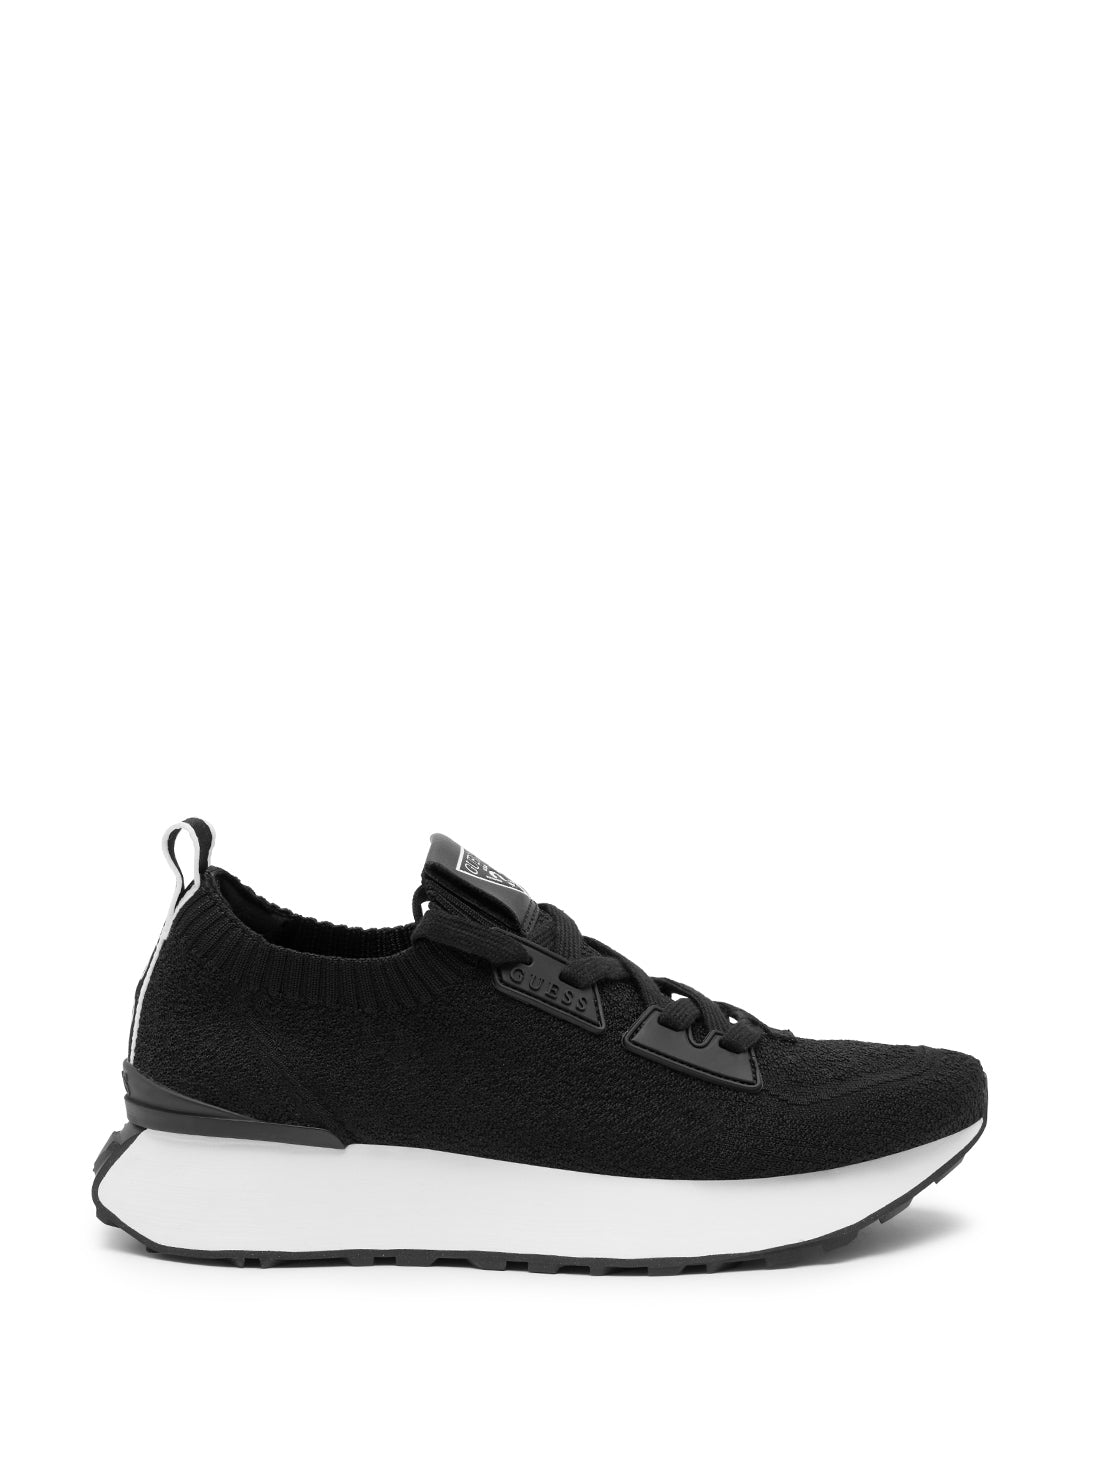 GUESS Black Laurine Low-Top Sneakers side view